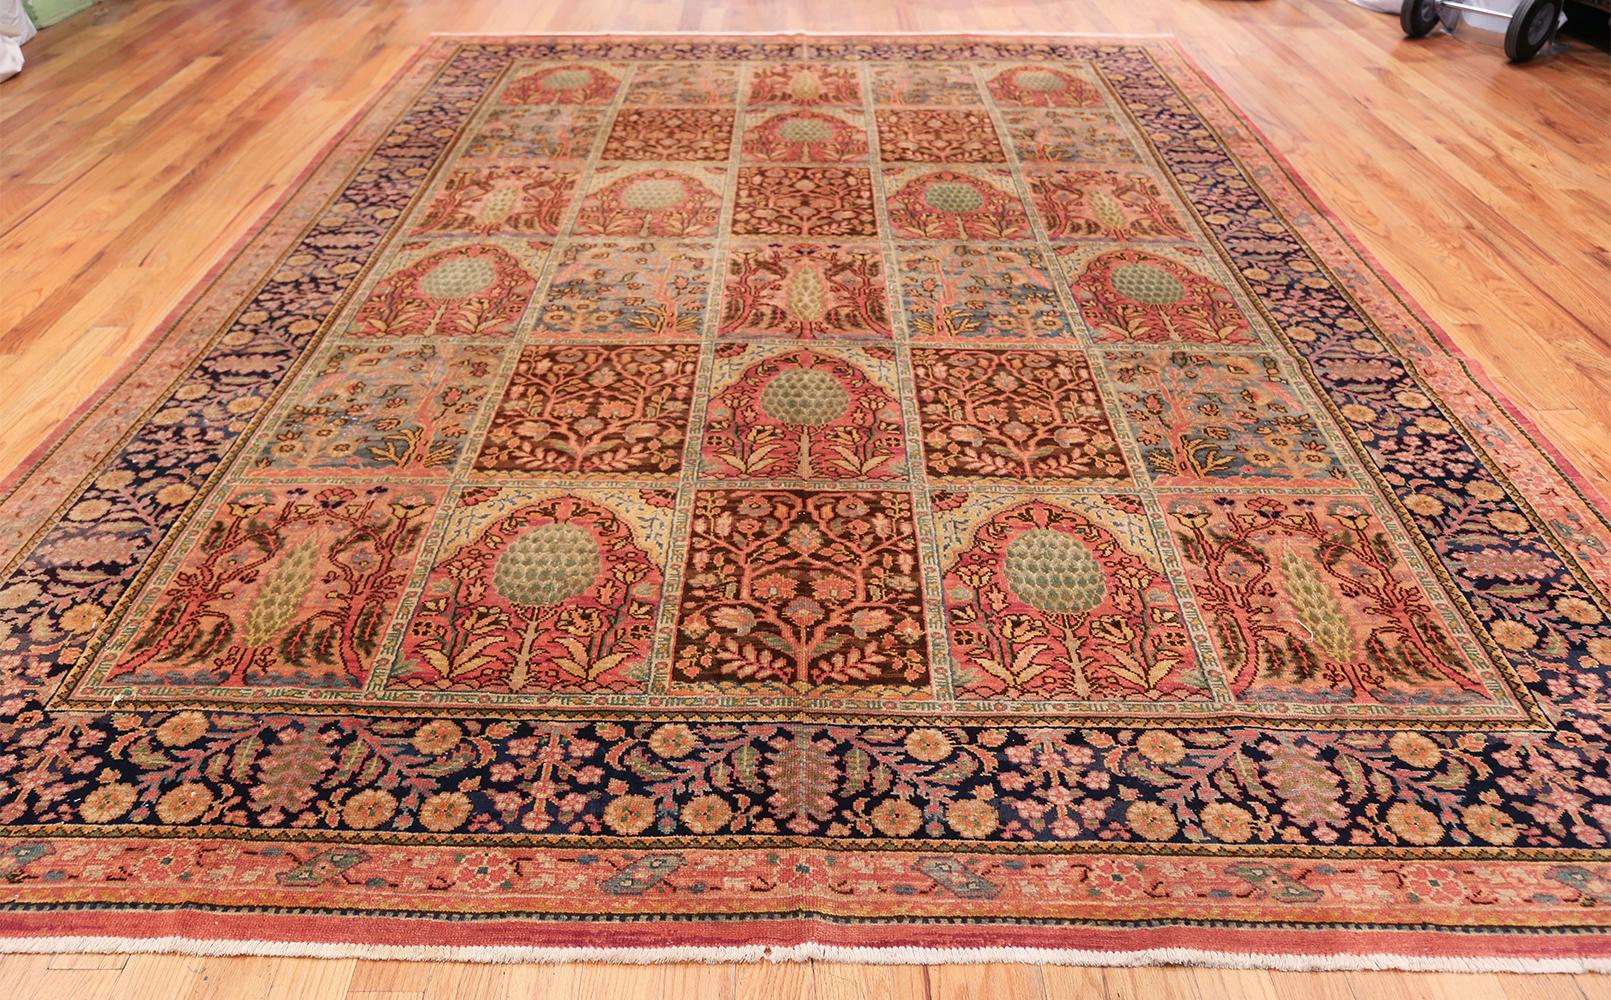 Beautiful Room Size Antique Israeli Bezalel Rug, Country Of Origin / Rug Type: Israeli Rugs, Circa Date: 1920. Size: 9 ft x 12 ft 6 in (2.74 m x 3.81 m)

Elegant flowing shapes define the majority of the landscape present on this stunning antique